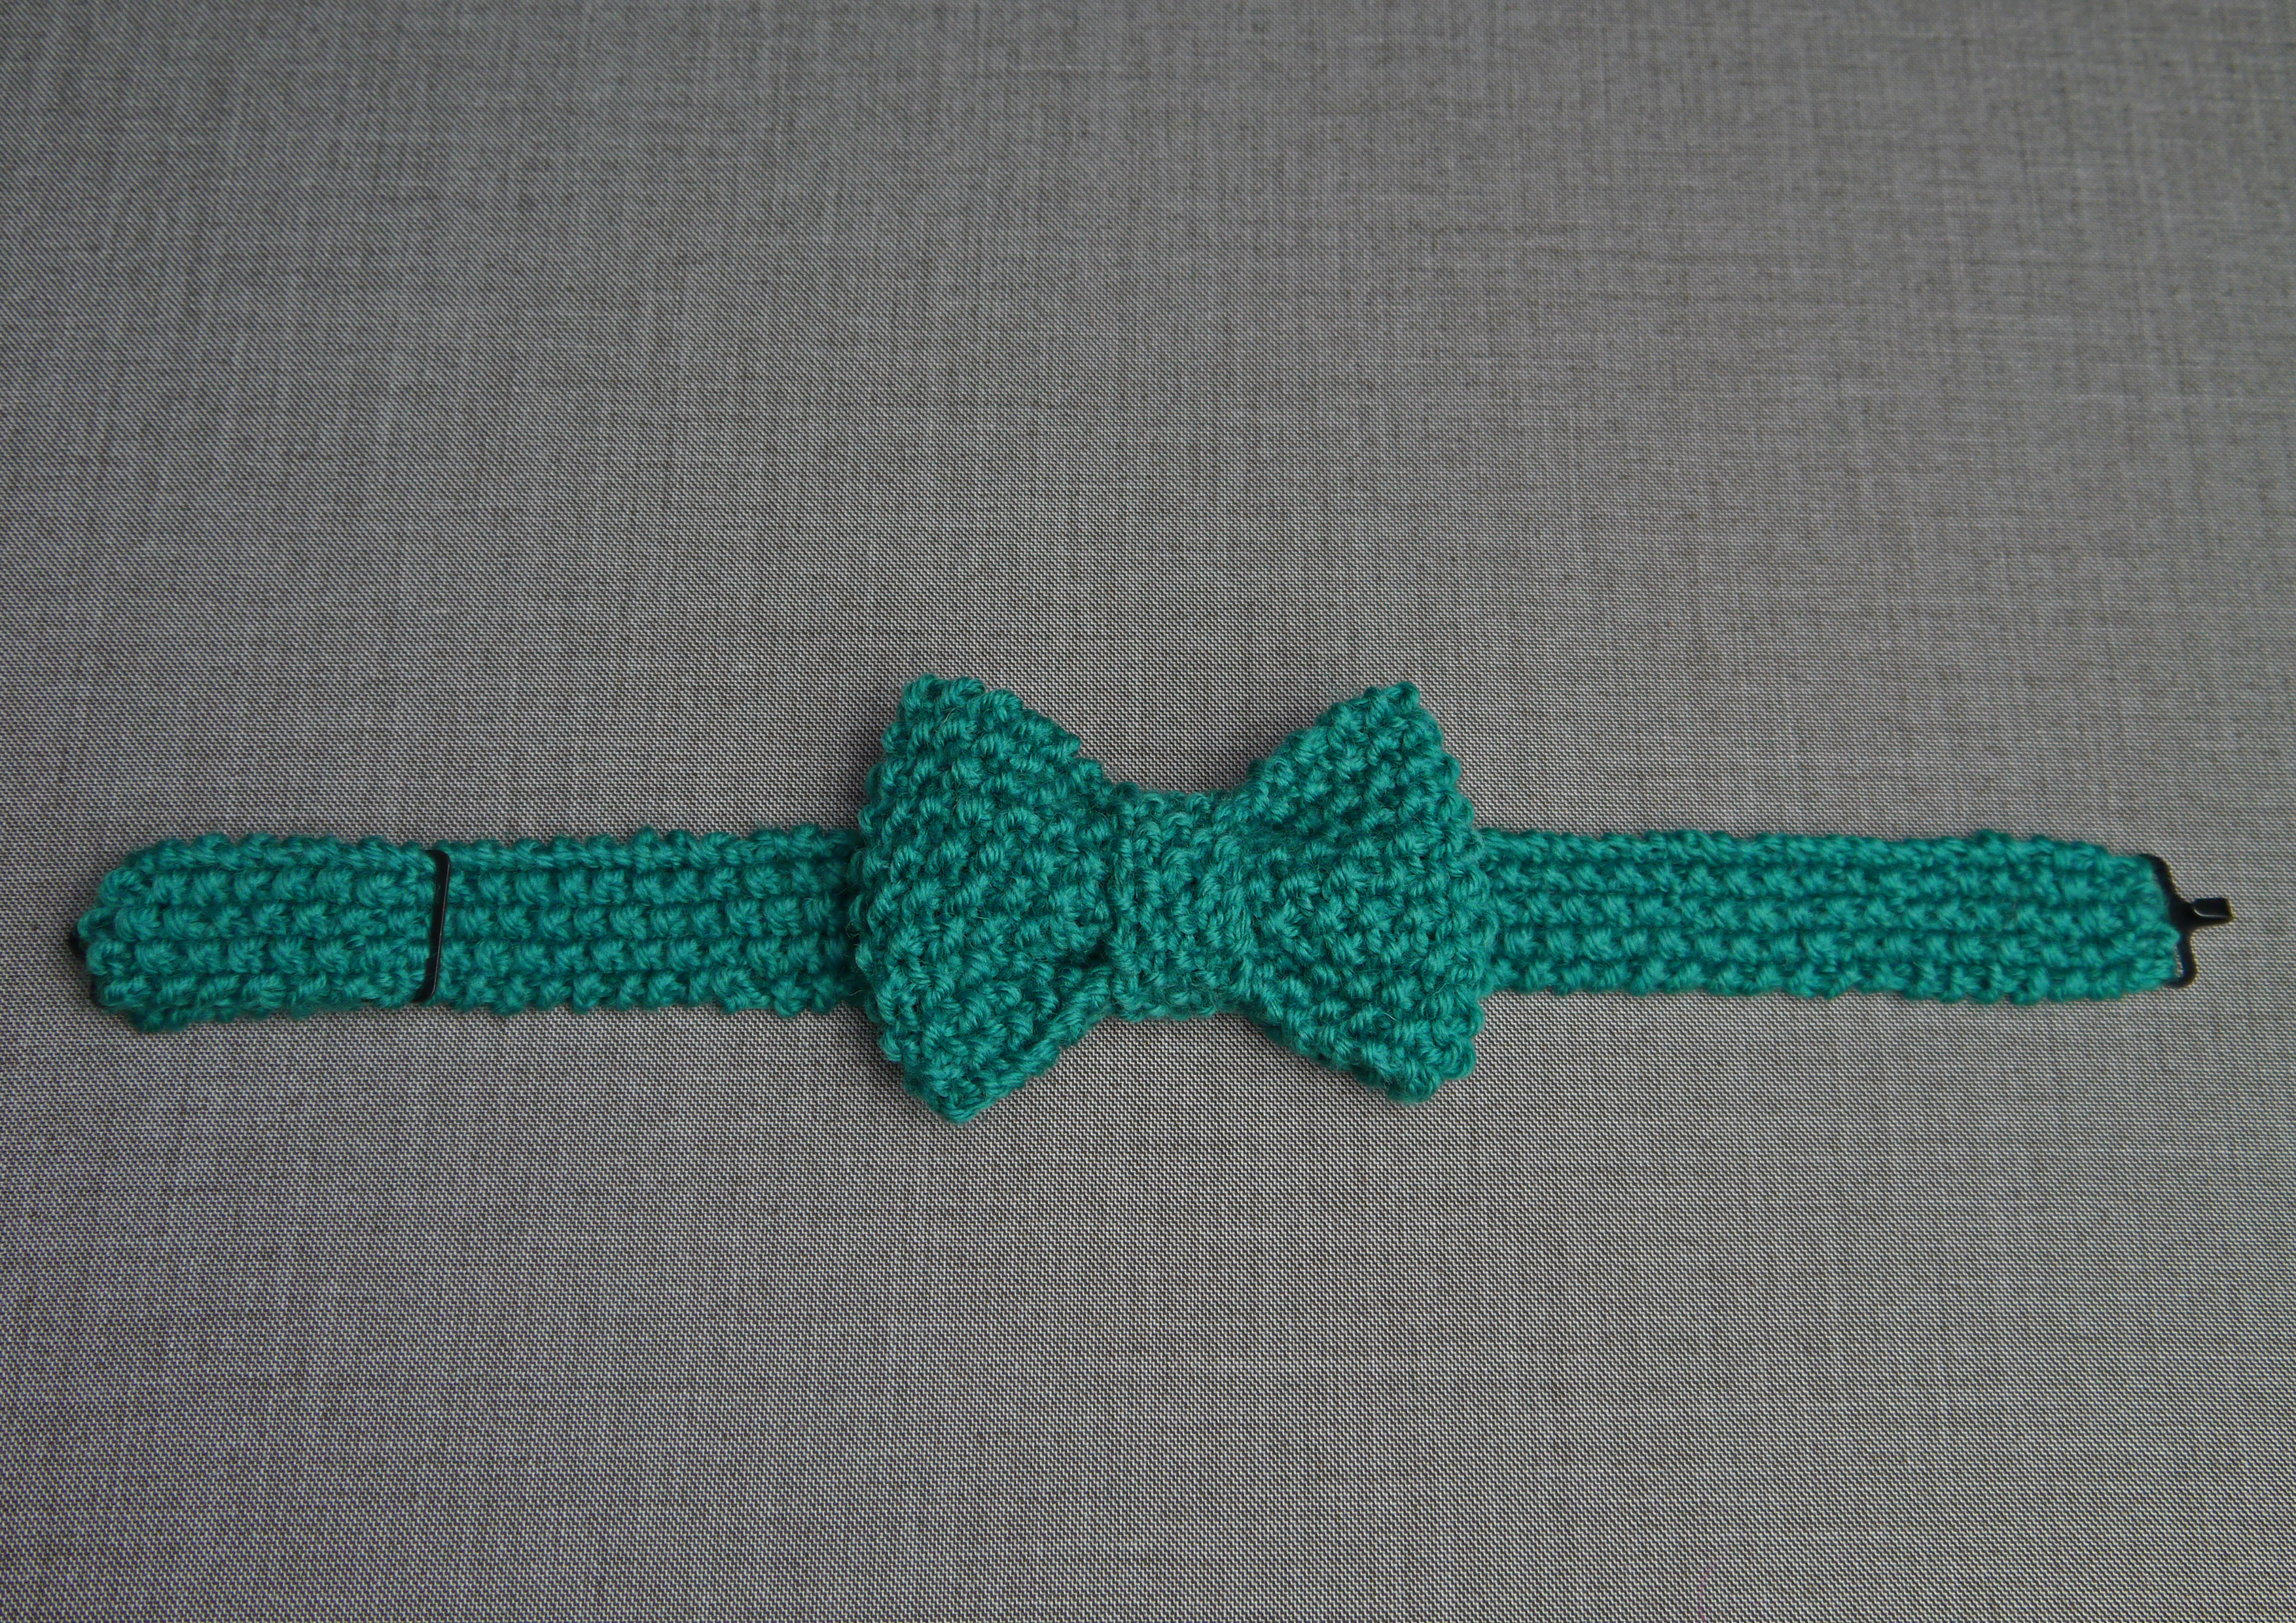 Bow tie knitting pattern by Julie And The Knits